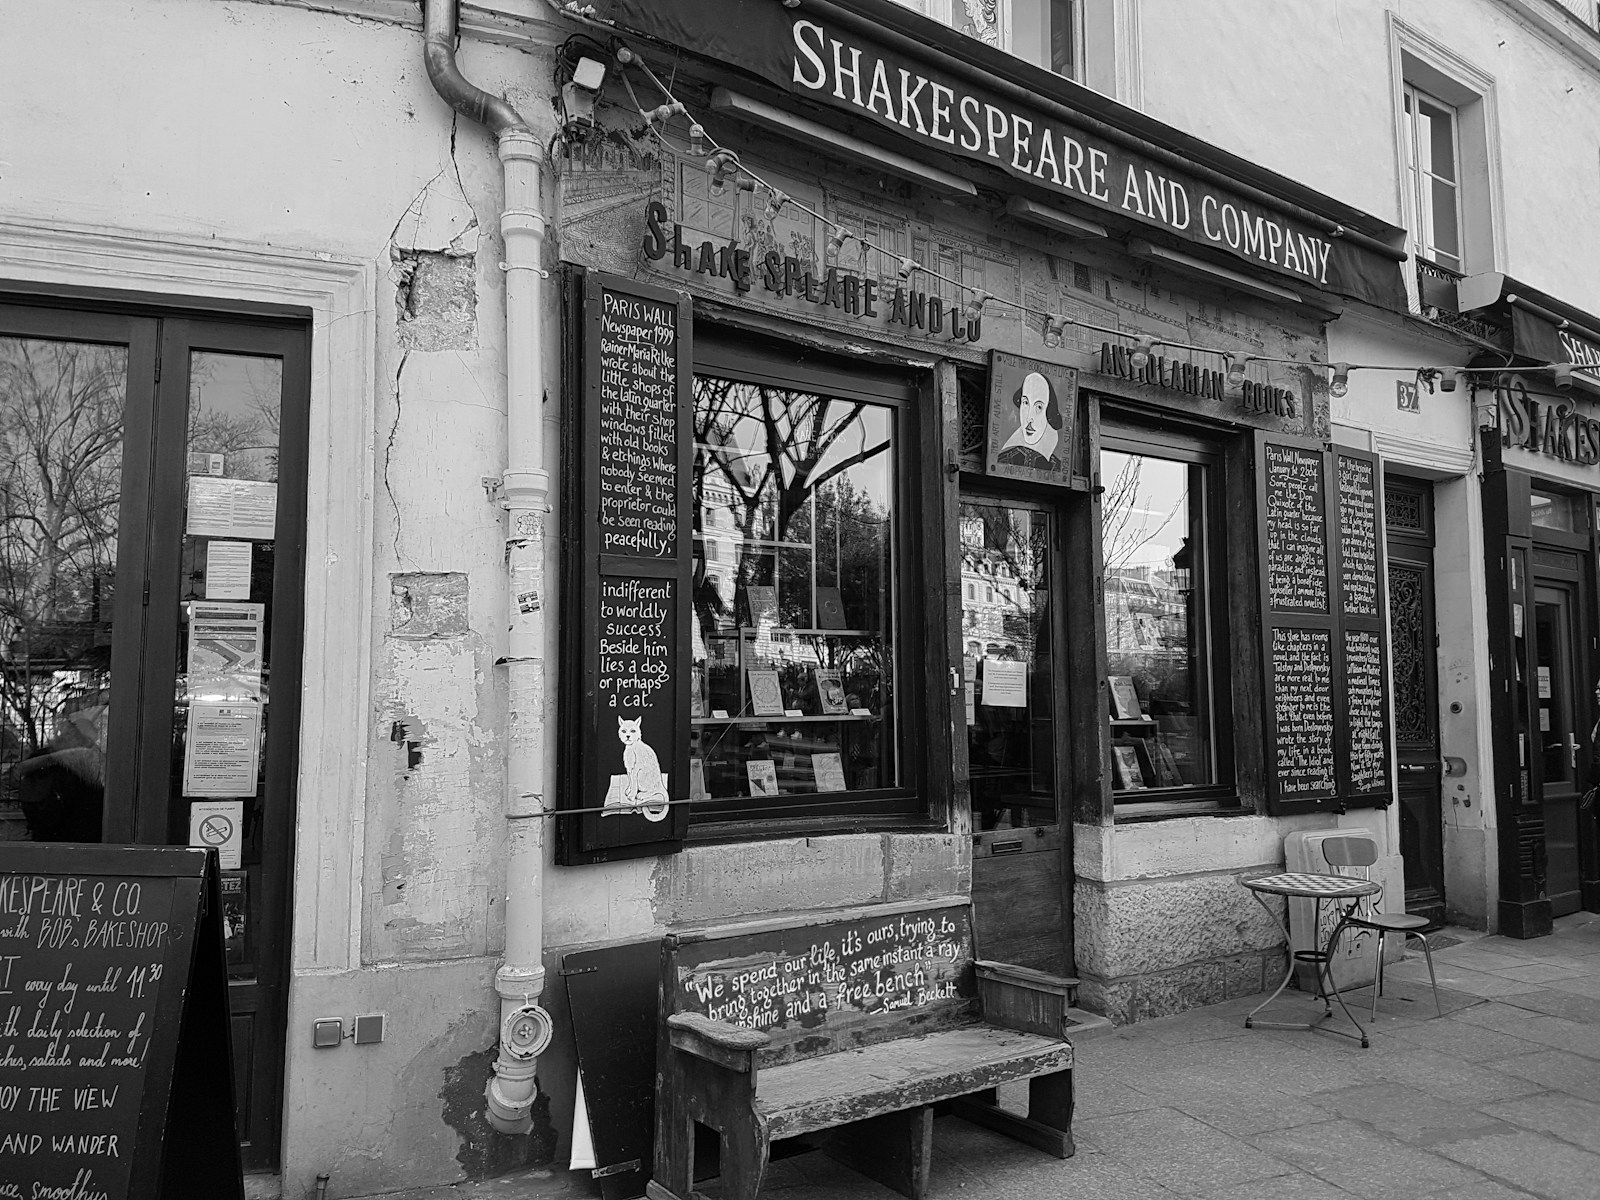 Shakespeare and Company building during daytime